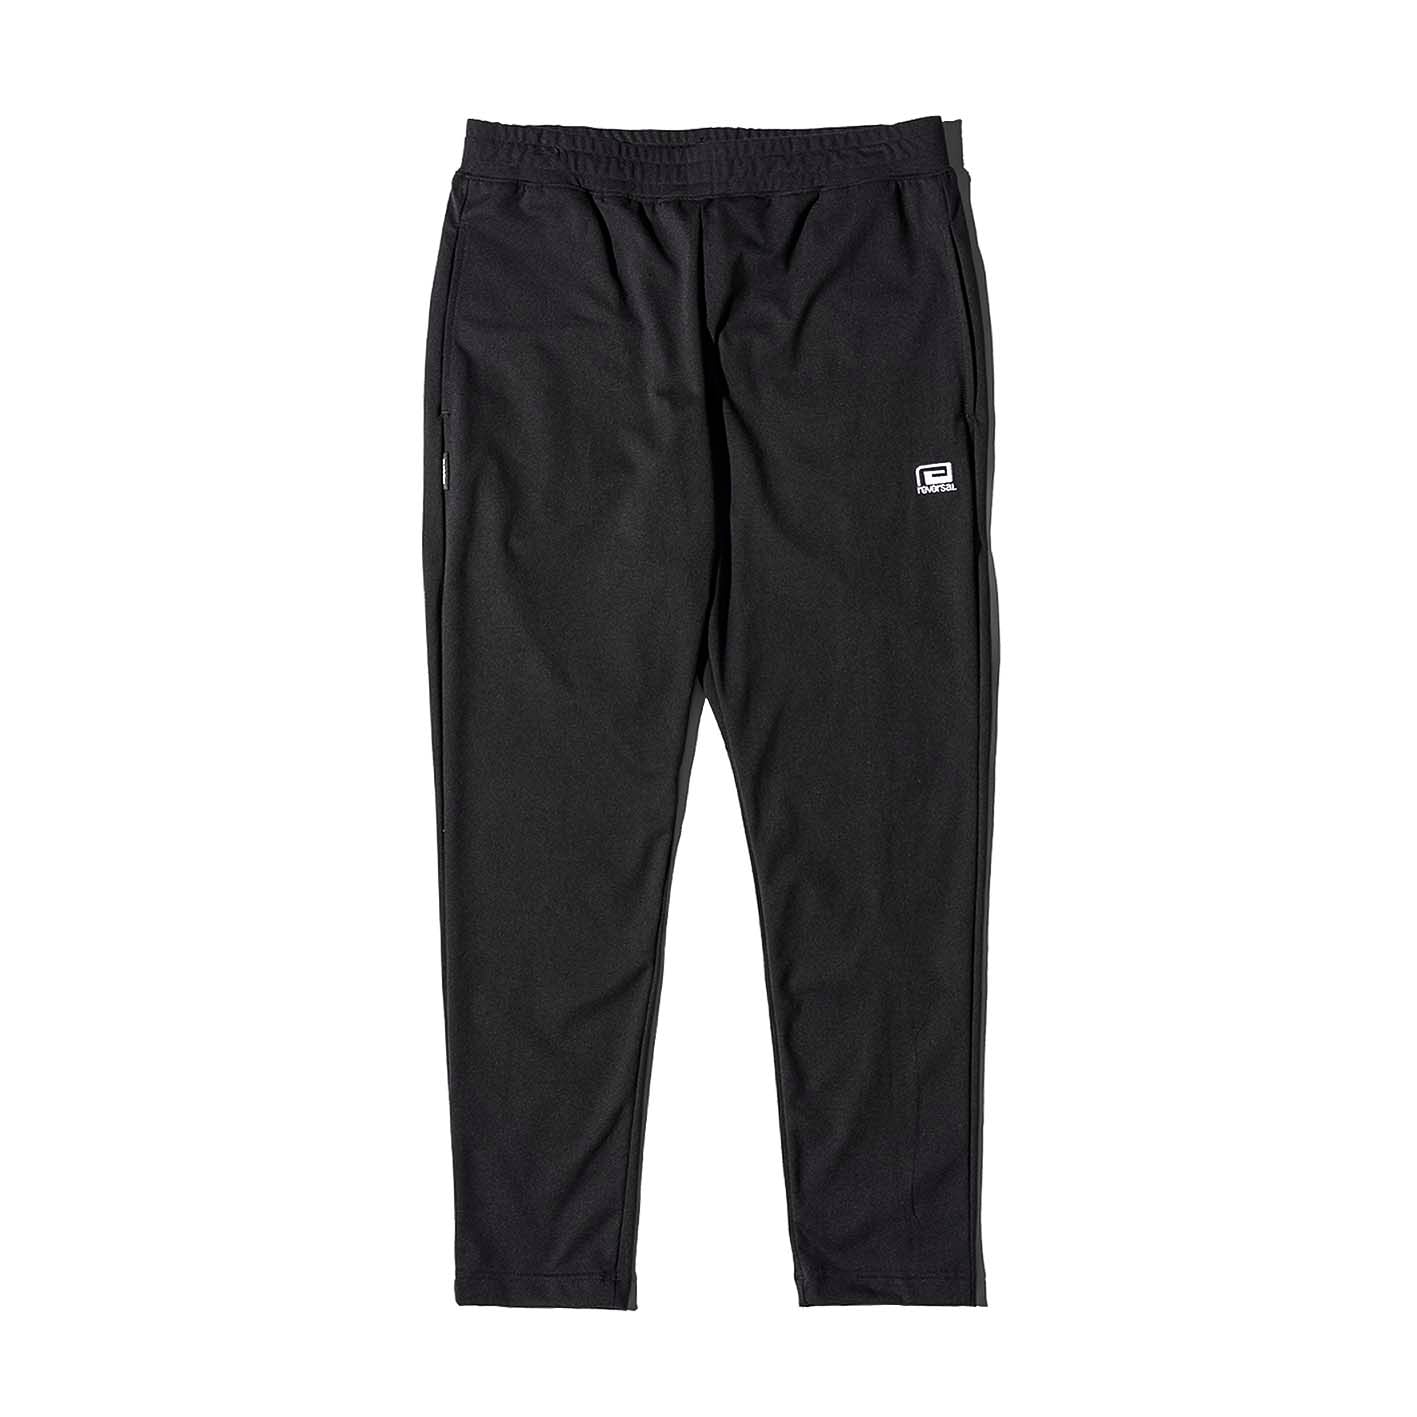 Shop Limited Edition Pants from Reversal RVDDW Japan